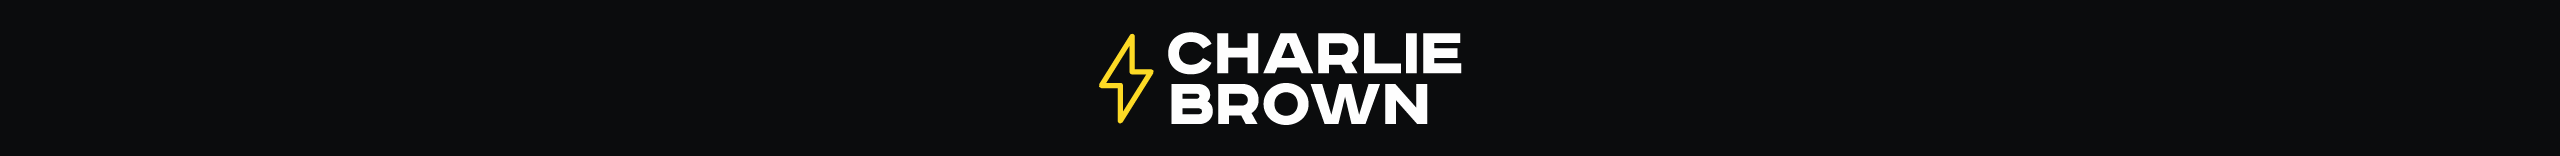 Charlie Brown's profile banner